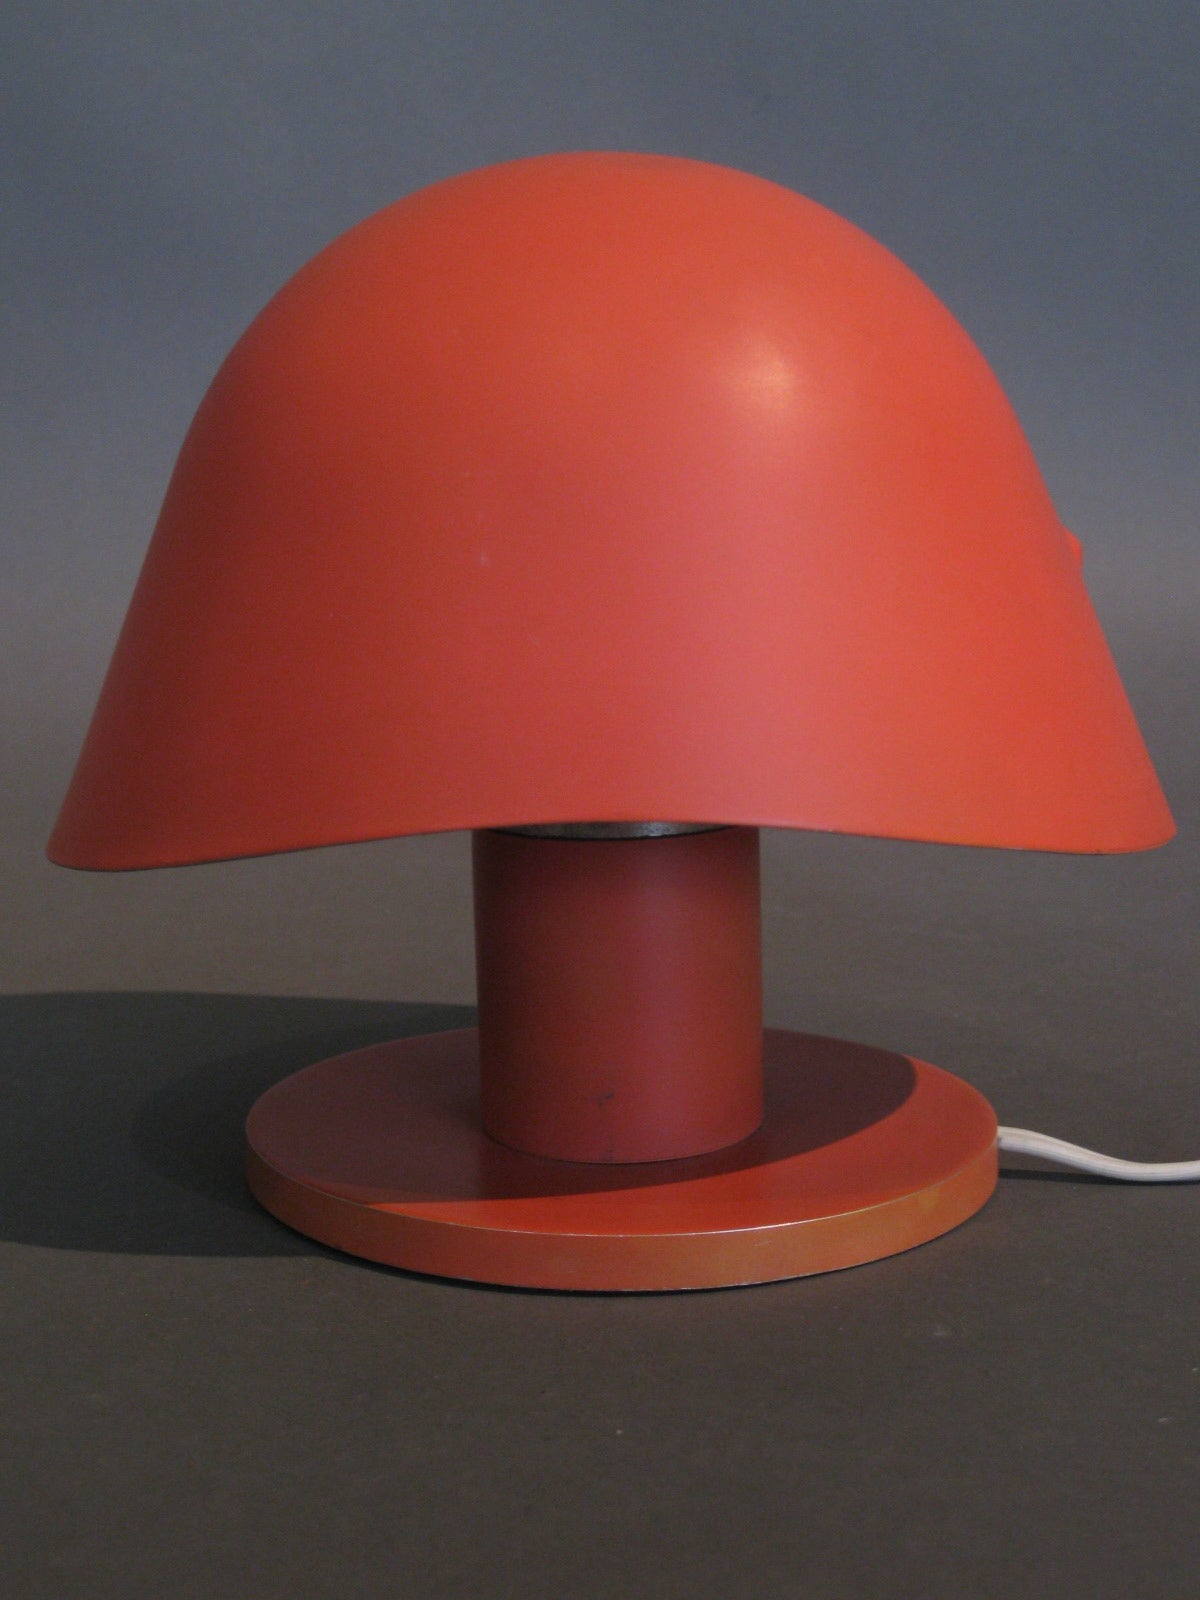 Rare Sergeant Schultz Table Lamp by George Nelson 1947